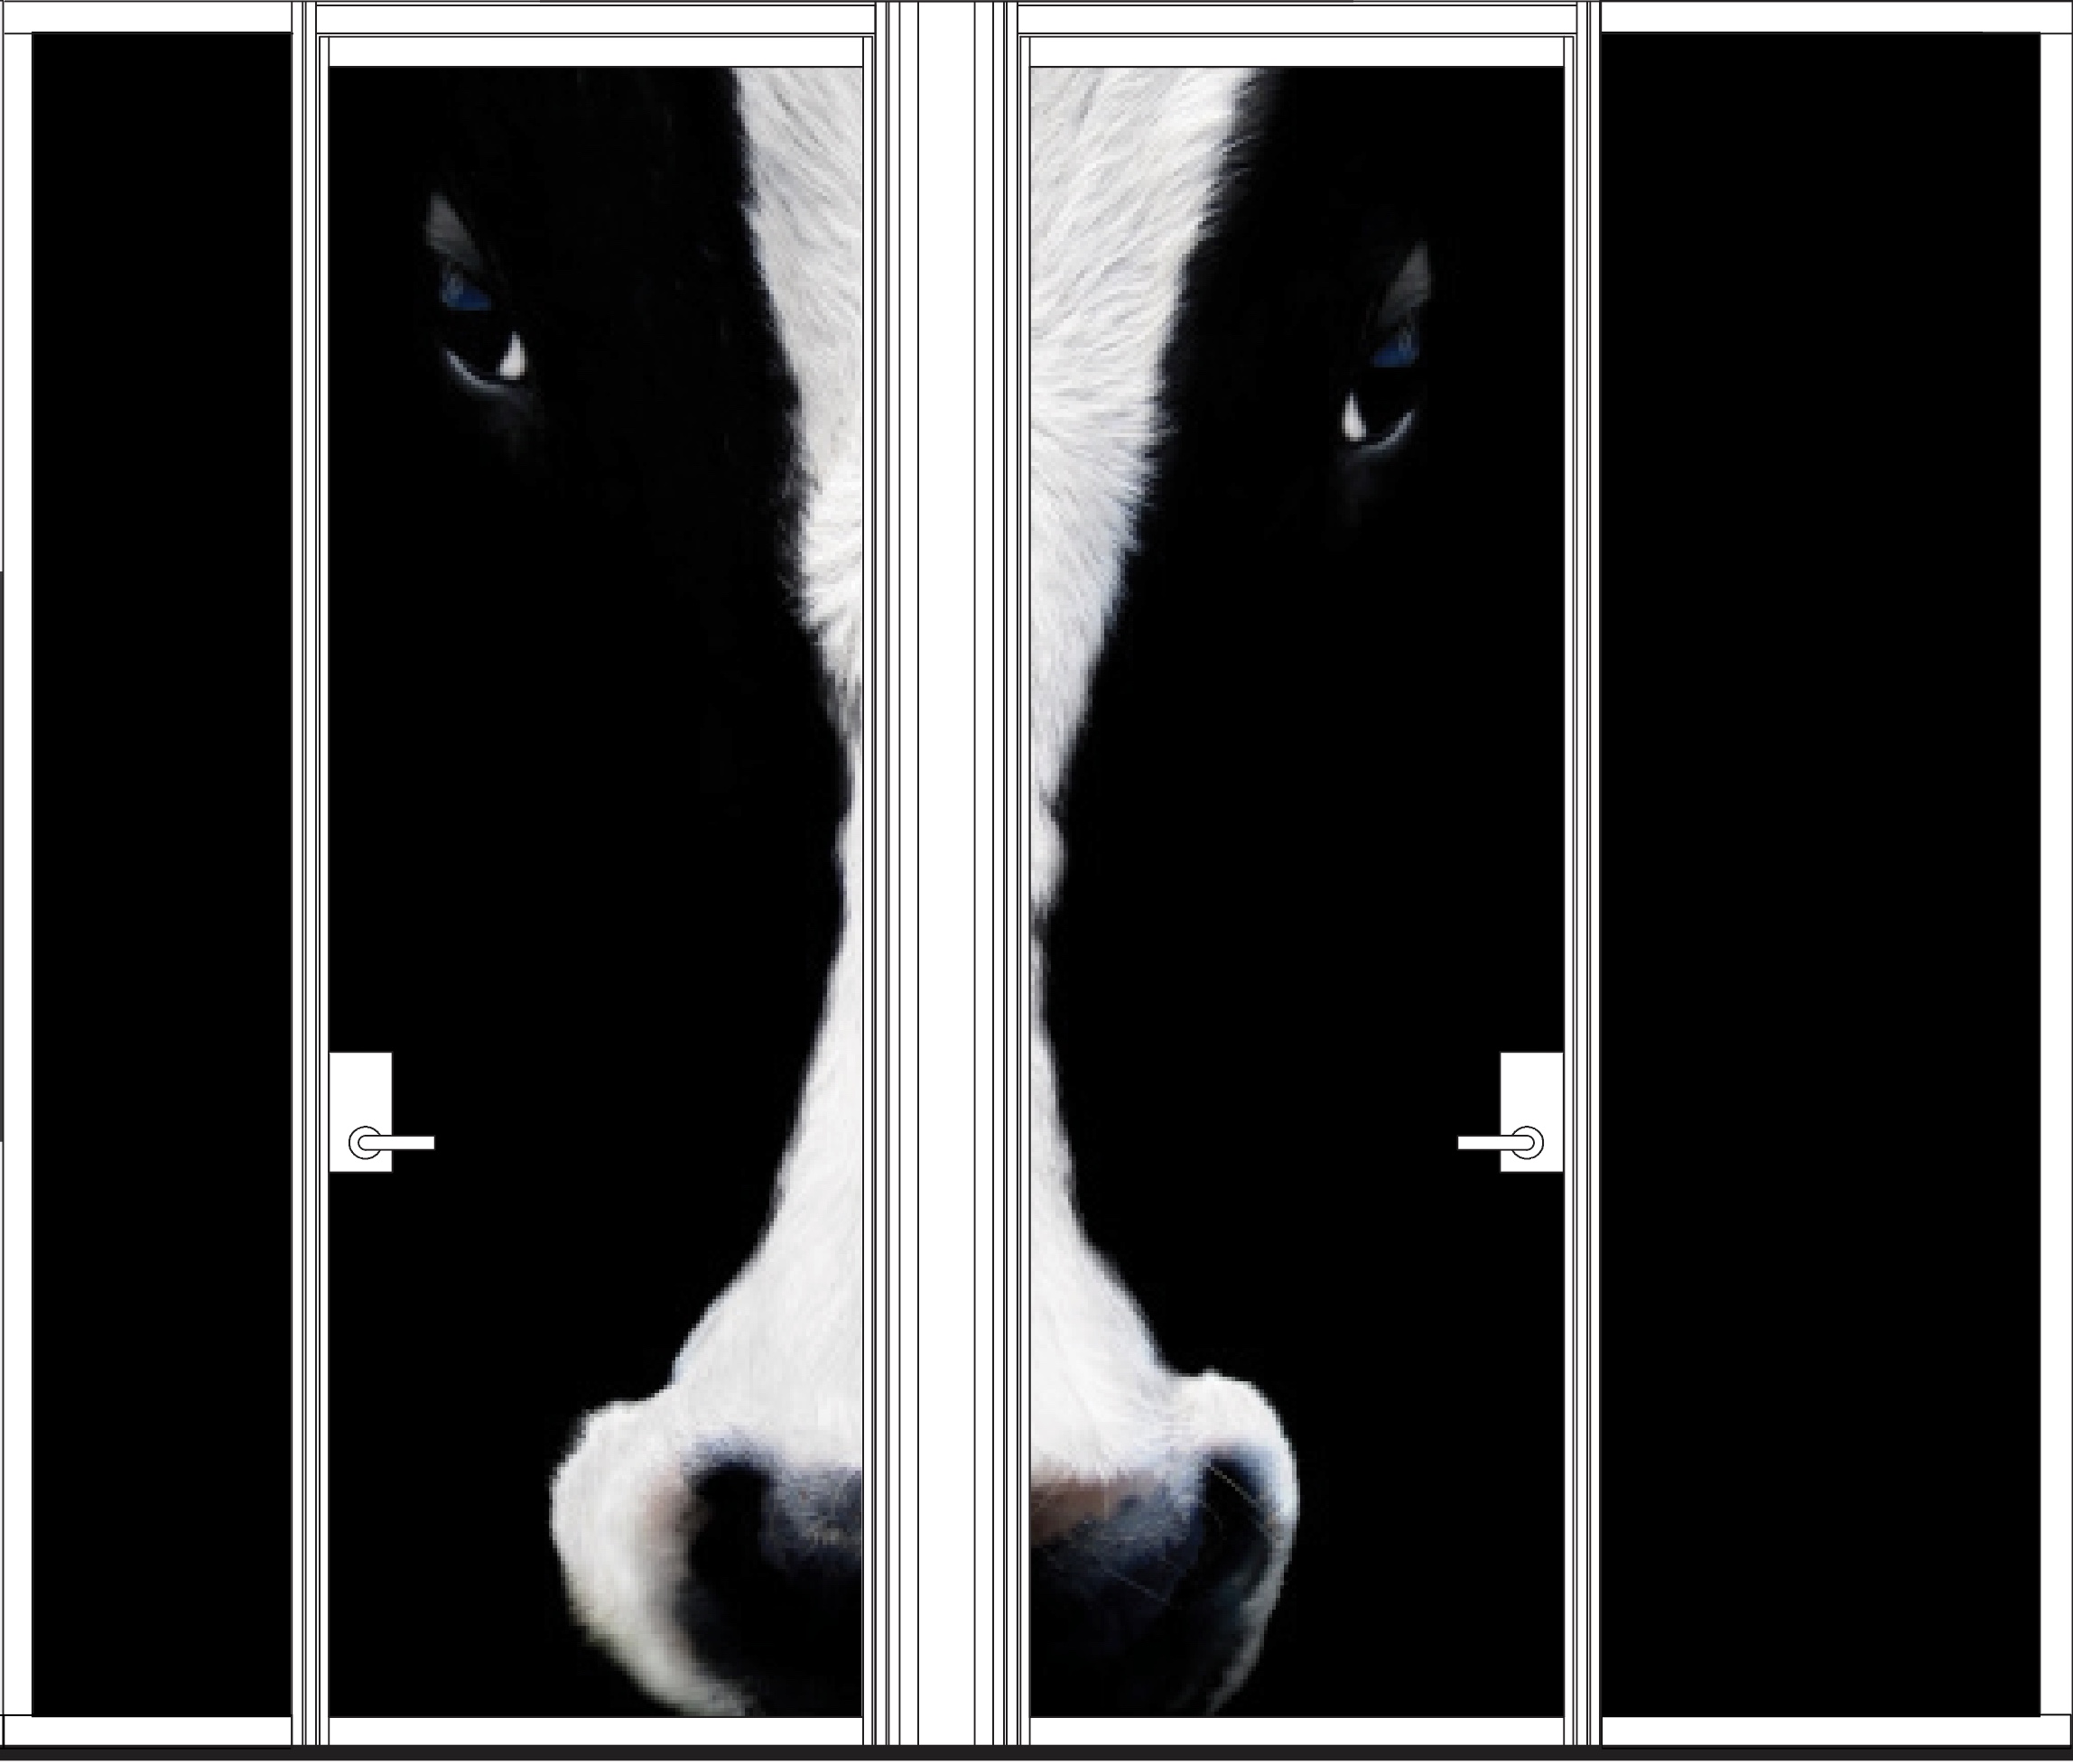 Elevation of cow graphic on doors for Periodic Table Workplace